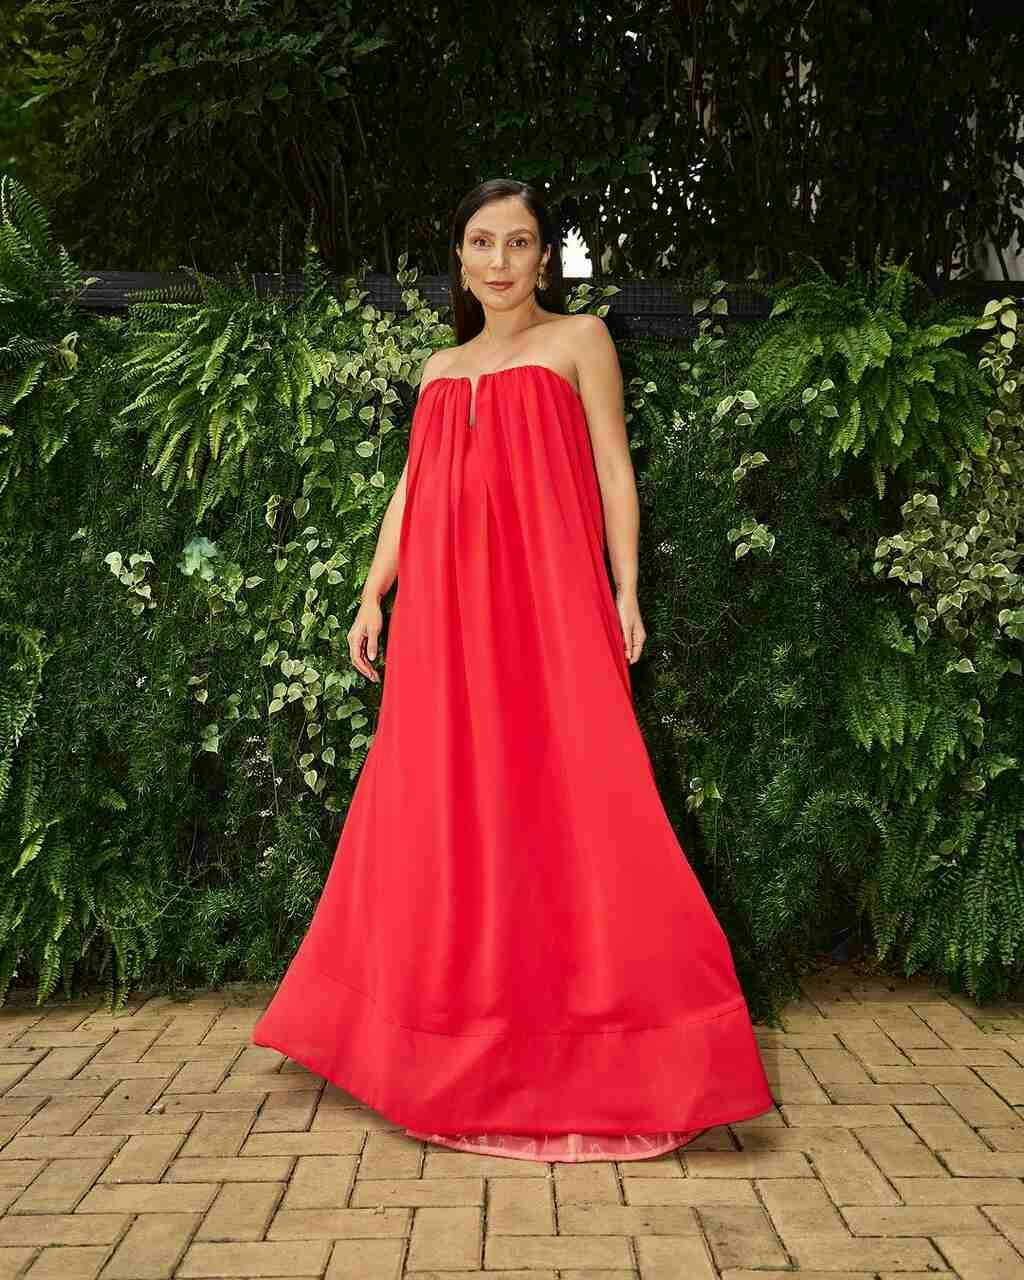 dress formal wear fashion gown evening dress adult female person woman standing